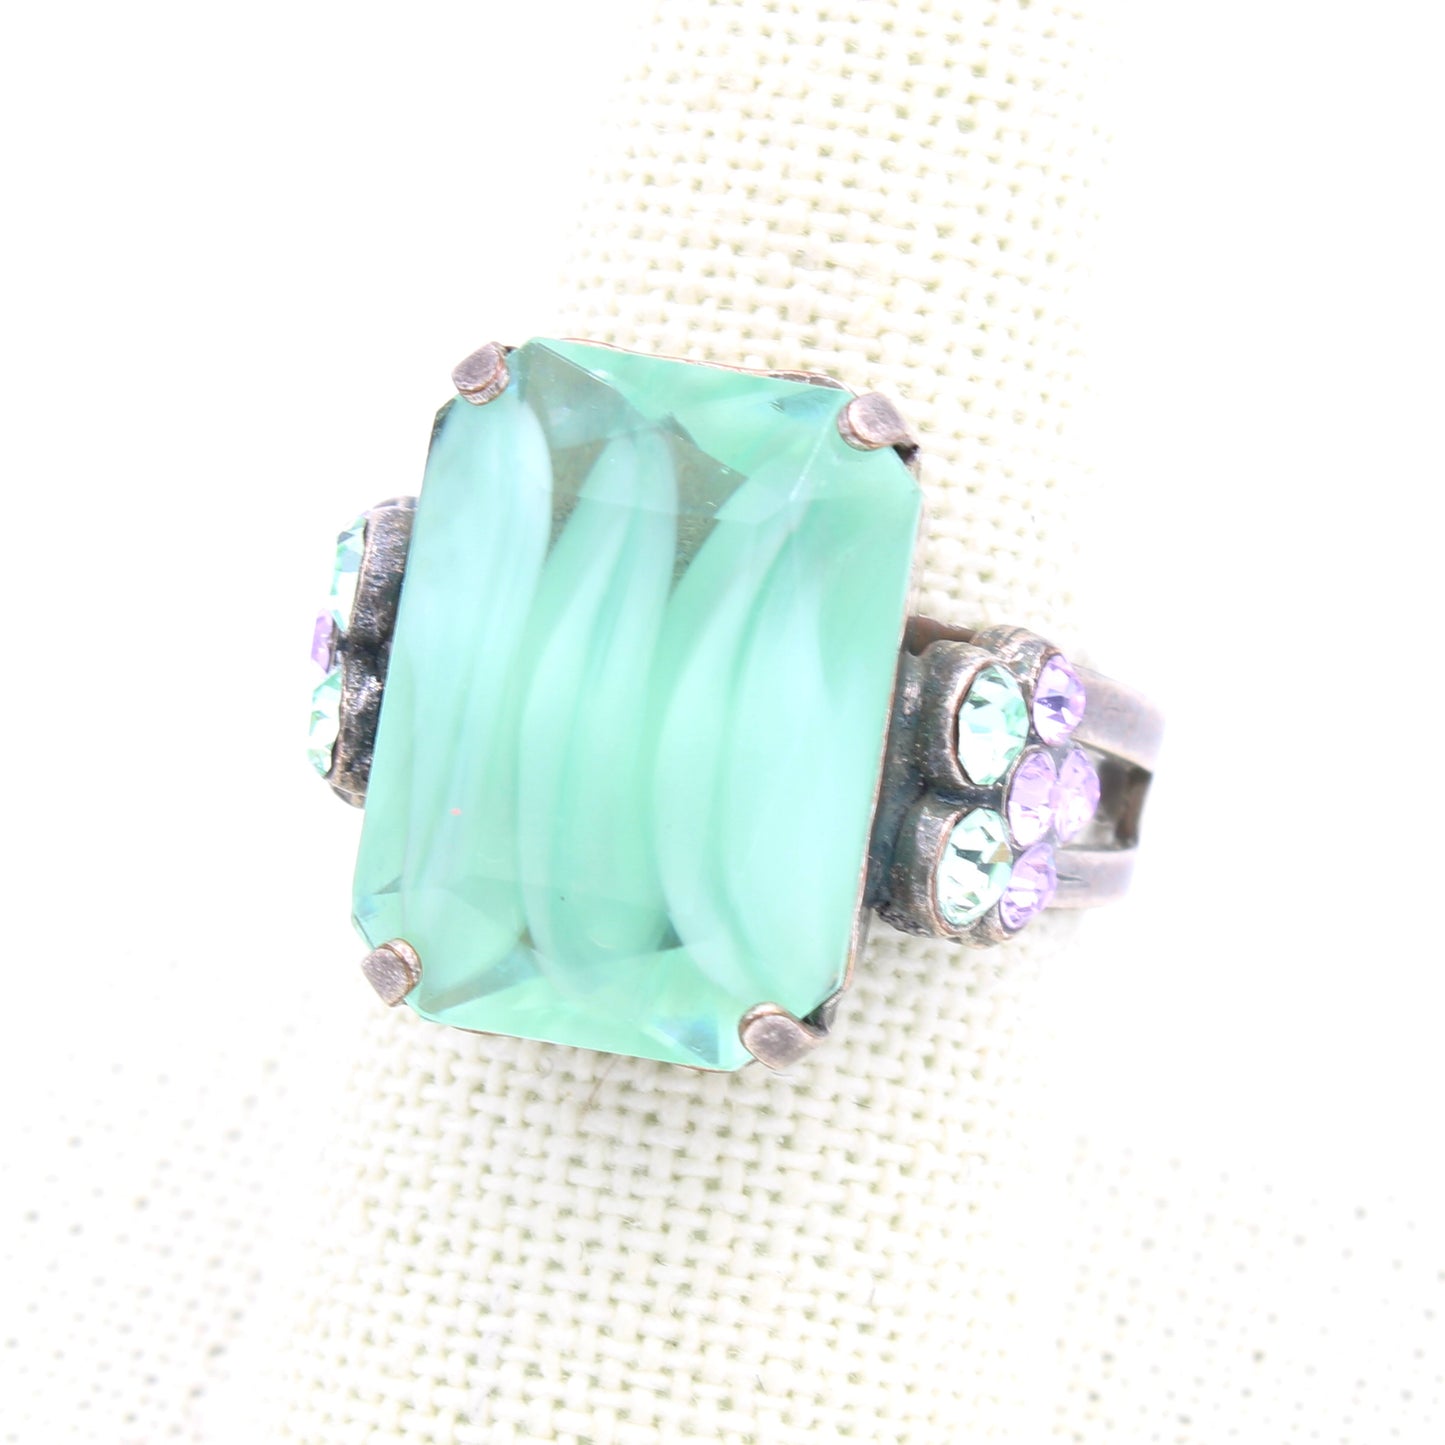 Mint Chip Collection Emerald Cut Flower Ring in Silver